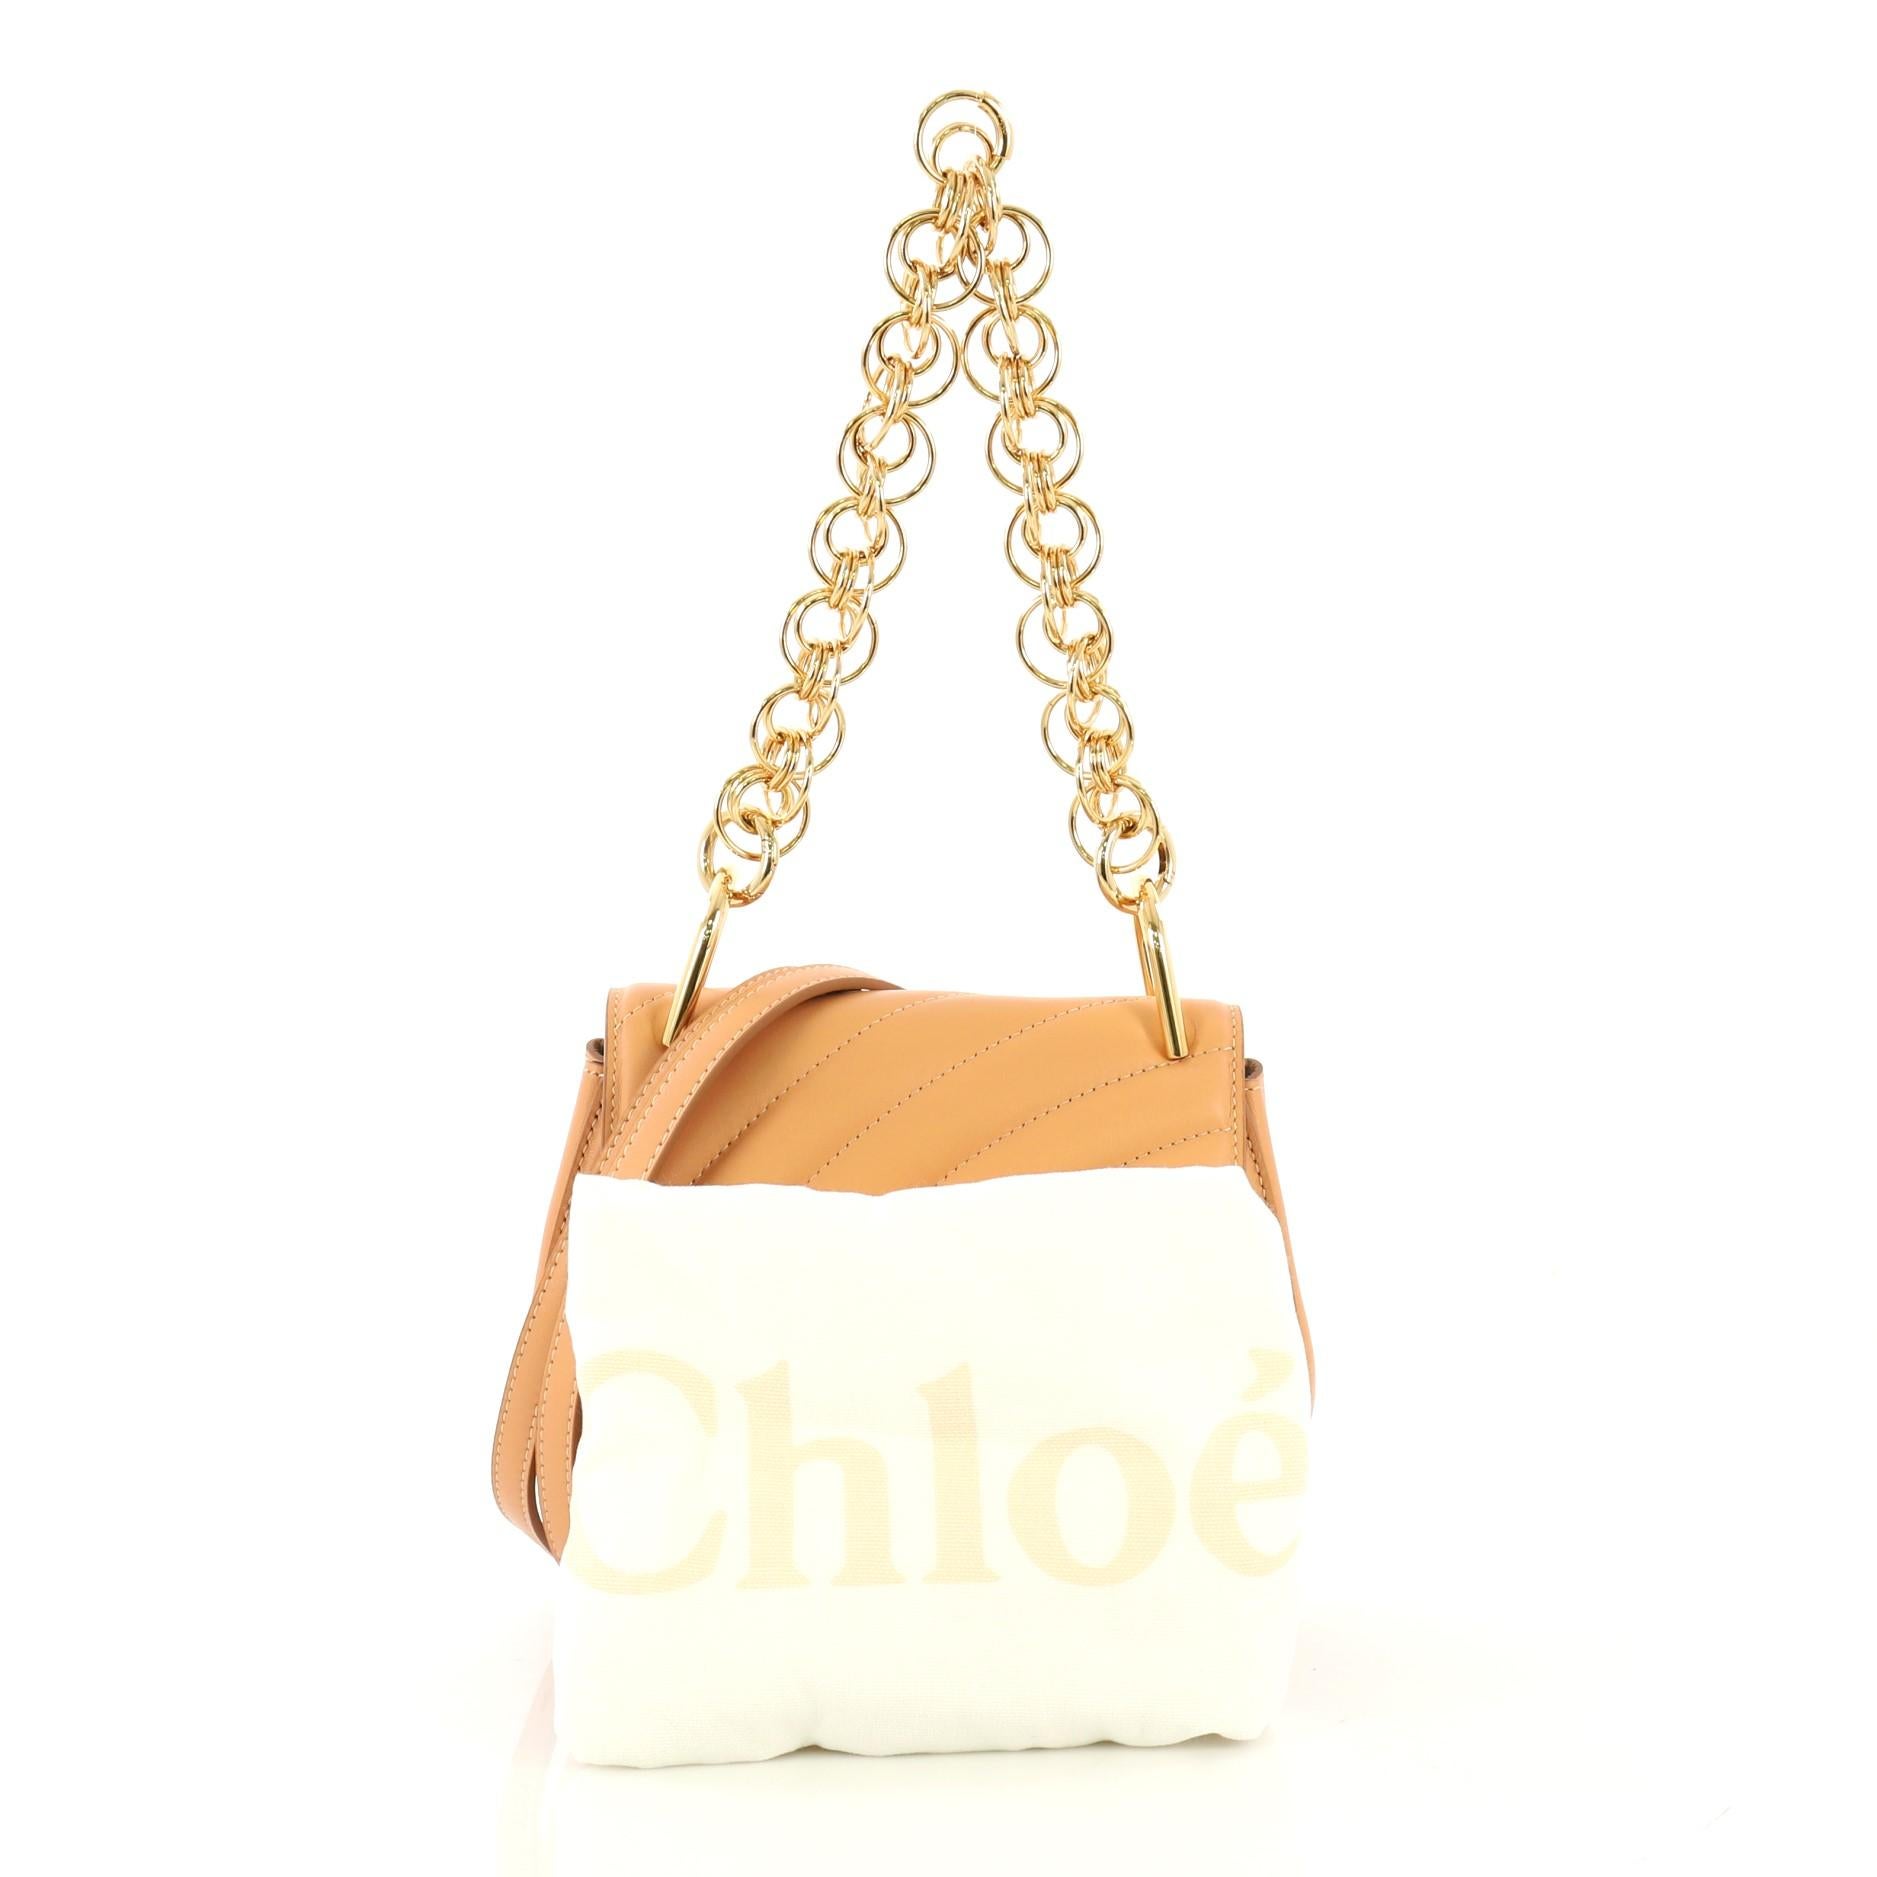 This Chloe Drew Bijou Crossbody Bag Quilted Leather Mini, crafted in peach quilted leather, features bracelet-inspired chain link handle and gold-tone hardware. Its pin and clasp closure opens to a beige suede interior with slip pocket. 

Estimated